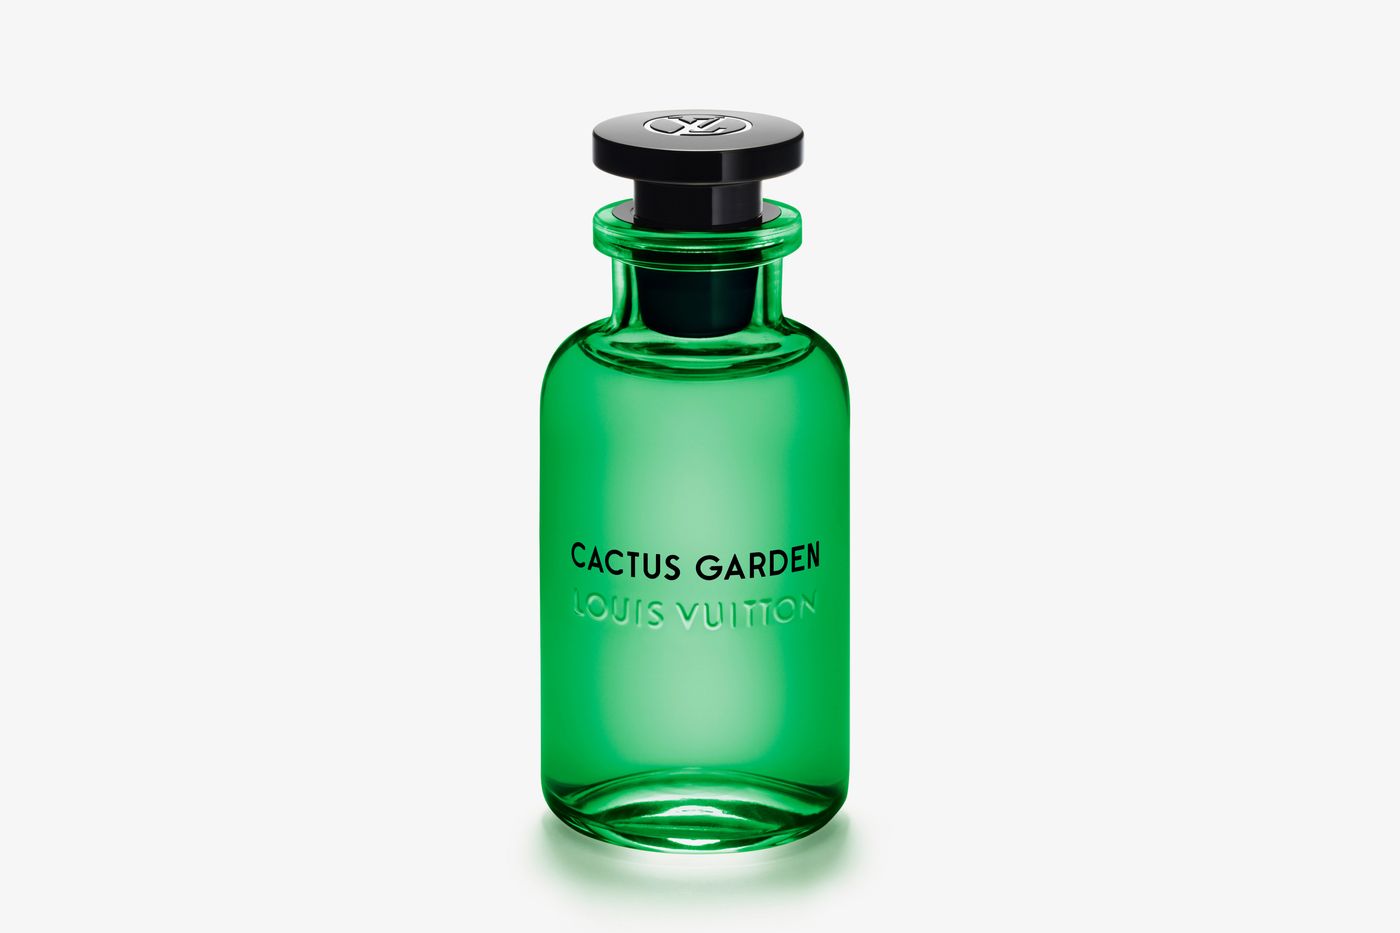 Unisex Fragrances That Will Please Anyone — Louis Vuitton's California Cool  Scents